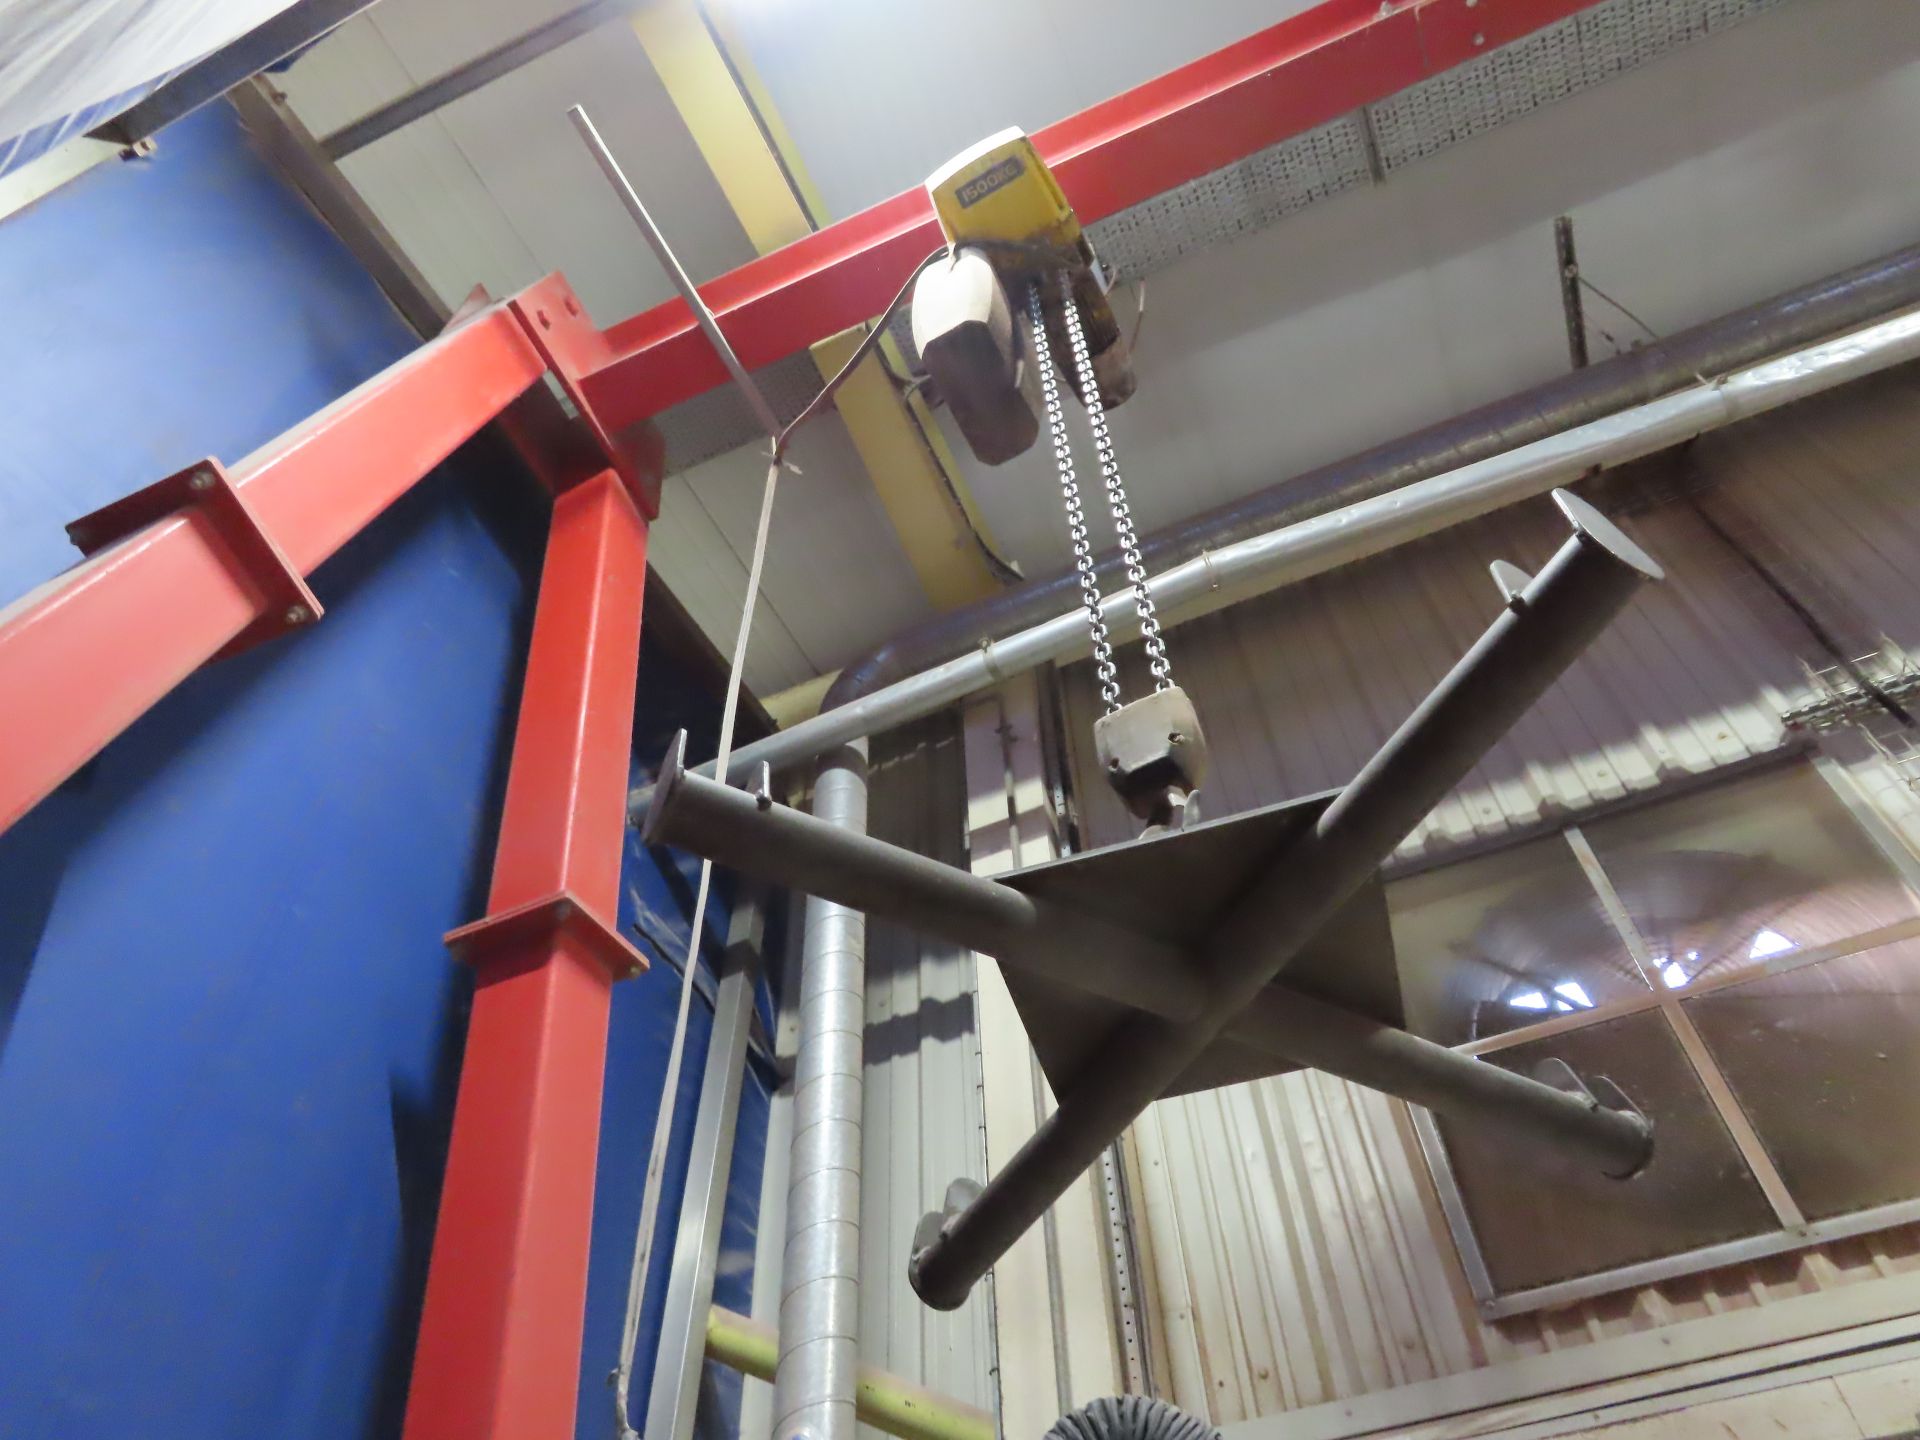 A-FRAME HOLDING 2 BAG HOISTS AND DUST EXTRACTORS. - Image 3 of 5